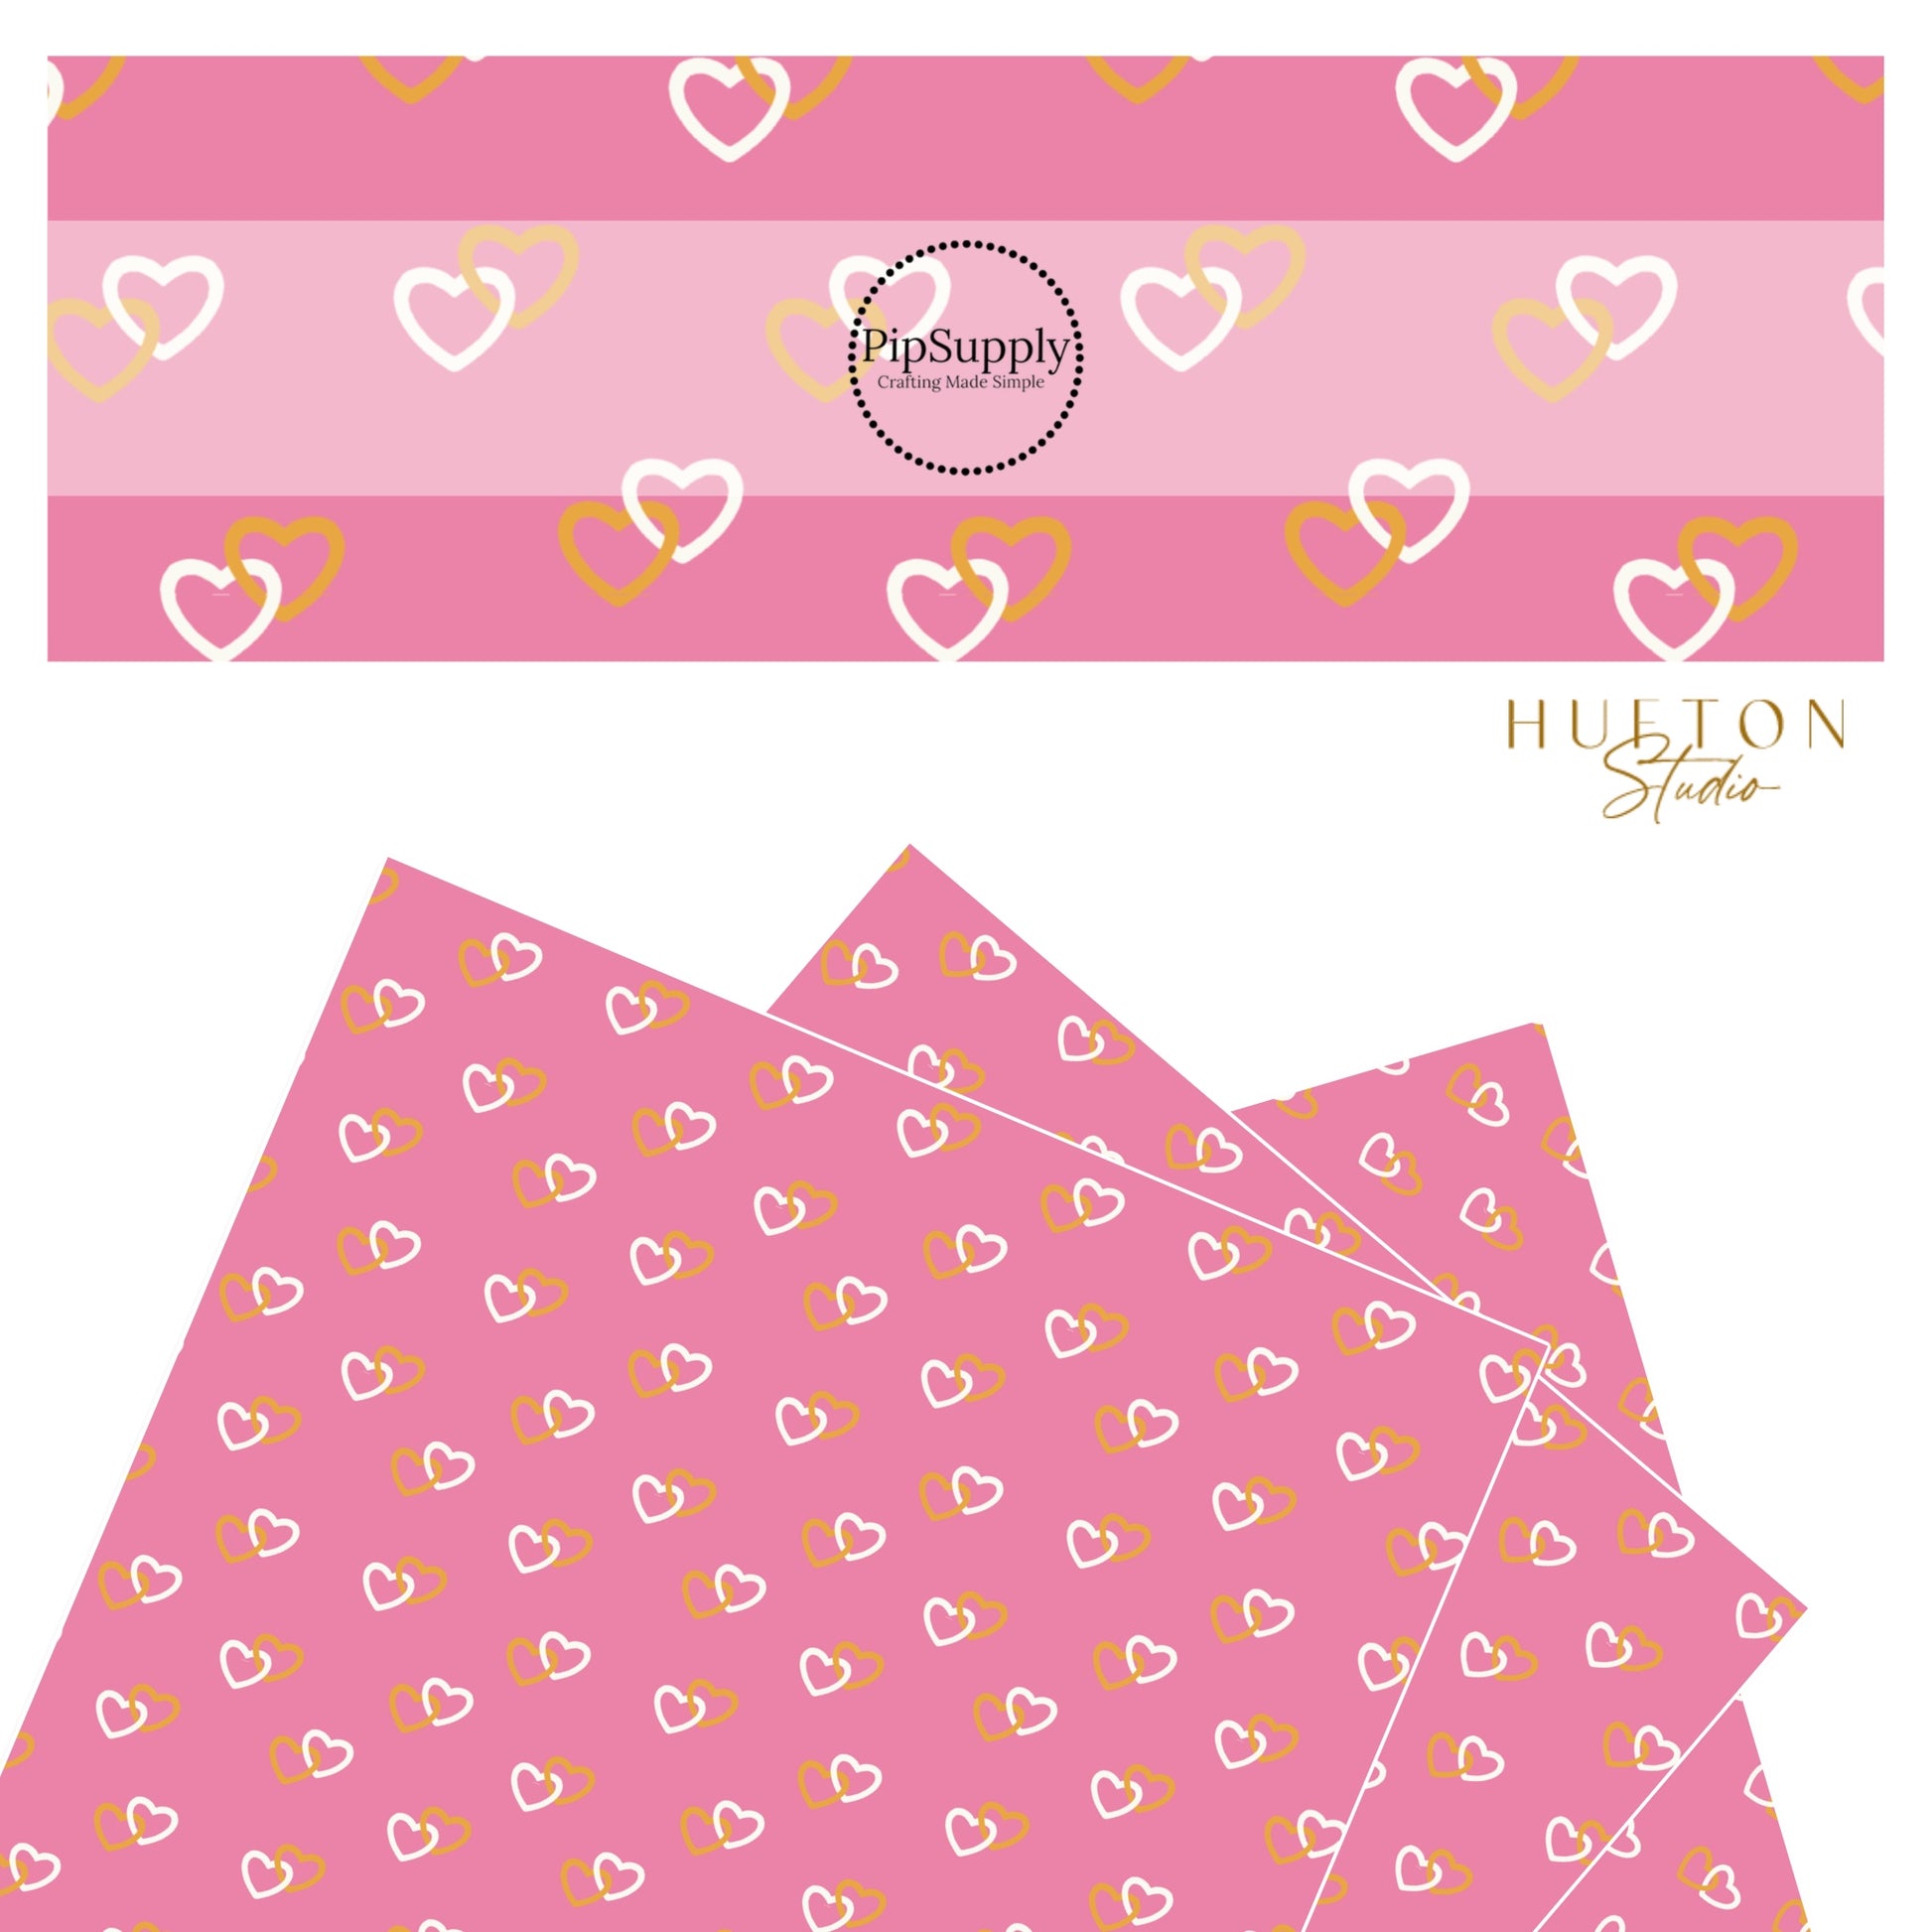 Golden orange hearts connected to white hearts on a pink faux leather sheet